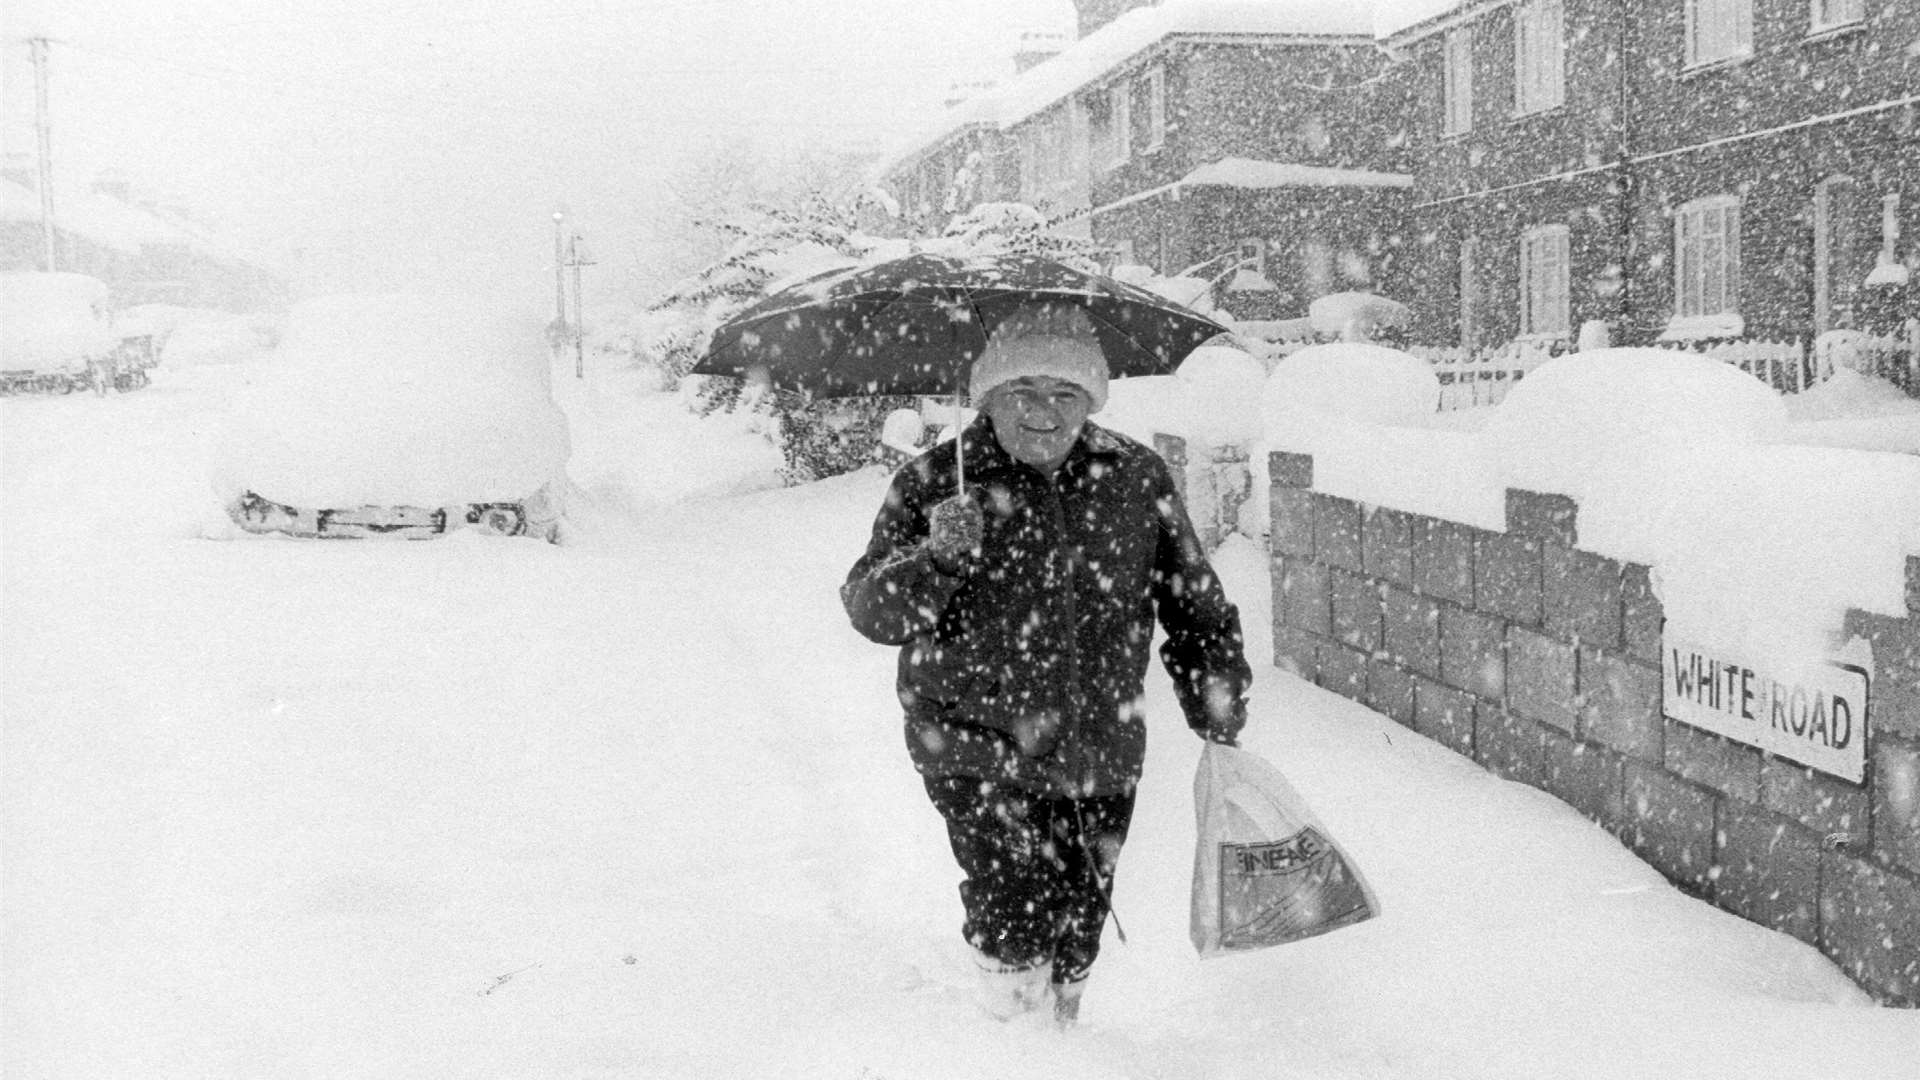 A whiteout in White Road during the heavy snow falls across Kent during 1987